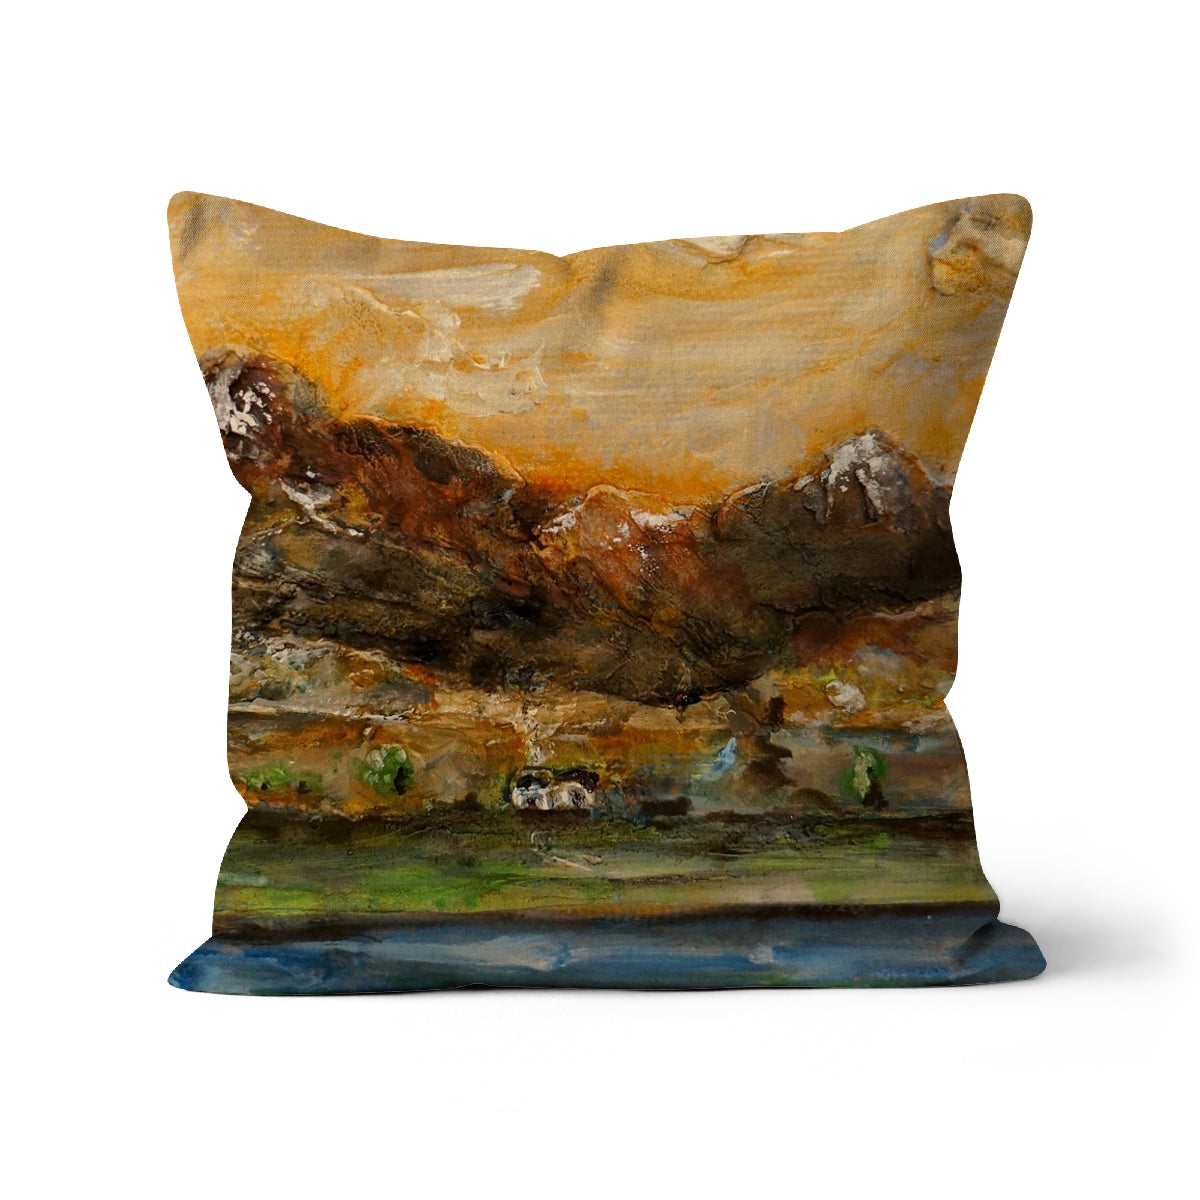 A Glencoe Cottage Art Gifts Cushion-Cushions-Glencoe Art Gallery-Linen-24"x24"-Paintings, Prints, Homeware, Art Gifts From Scotland By Scottish Artist Kevin Hunter